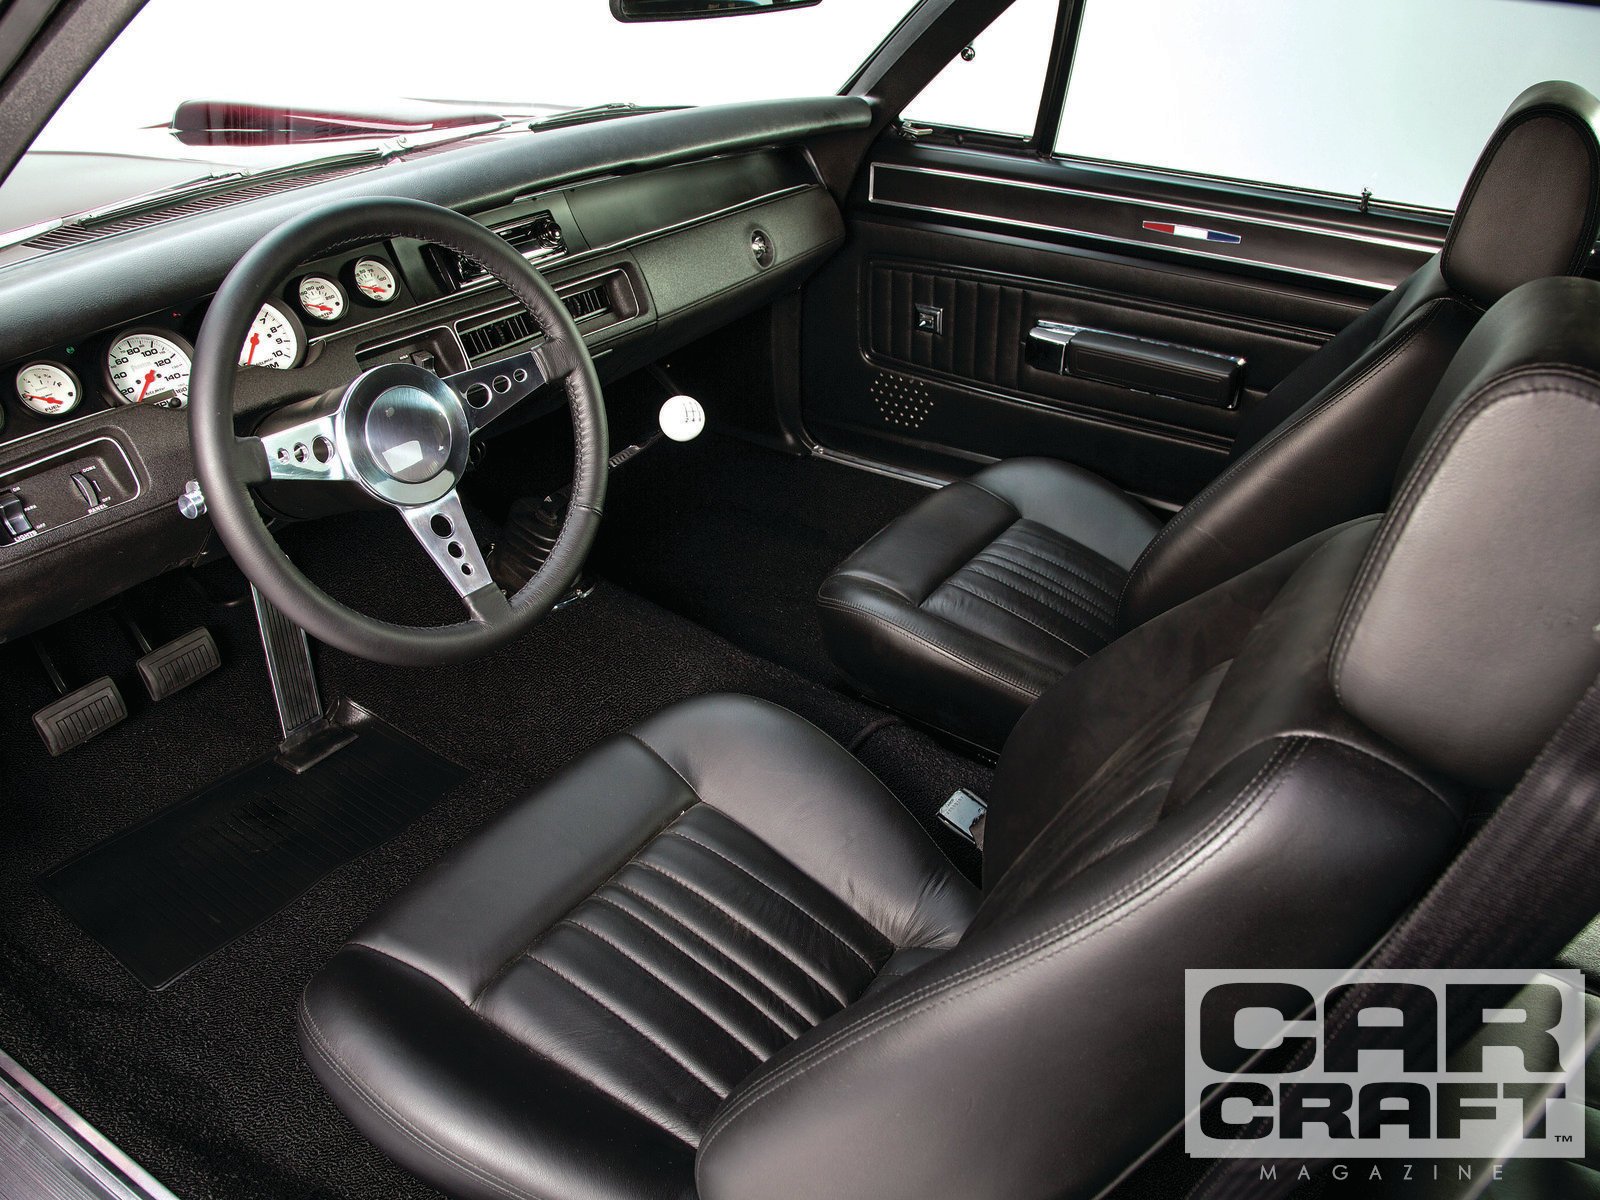 1969, 1970, B, Body, Plymouth, Dodge, Road, Bee, Hot, Rod, Rods, Muscle, Classic, Interior Wallpaper